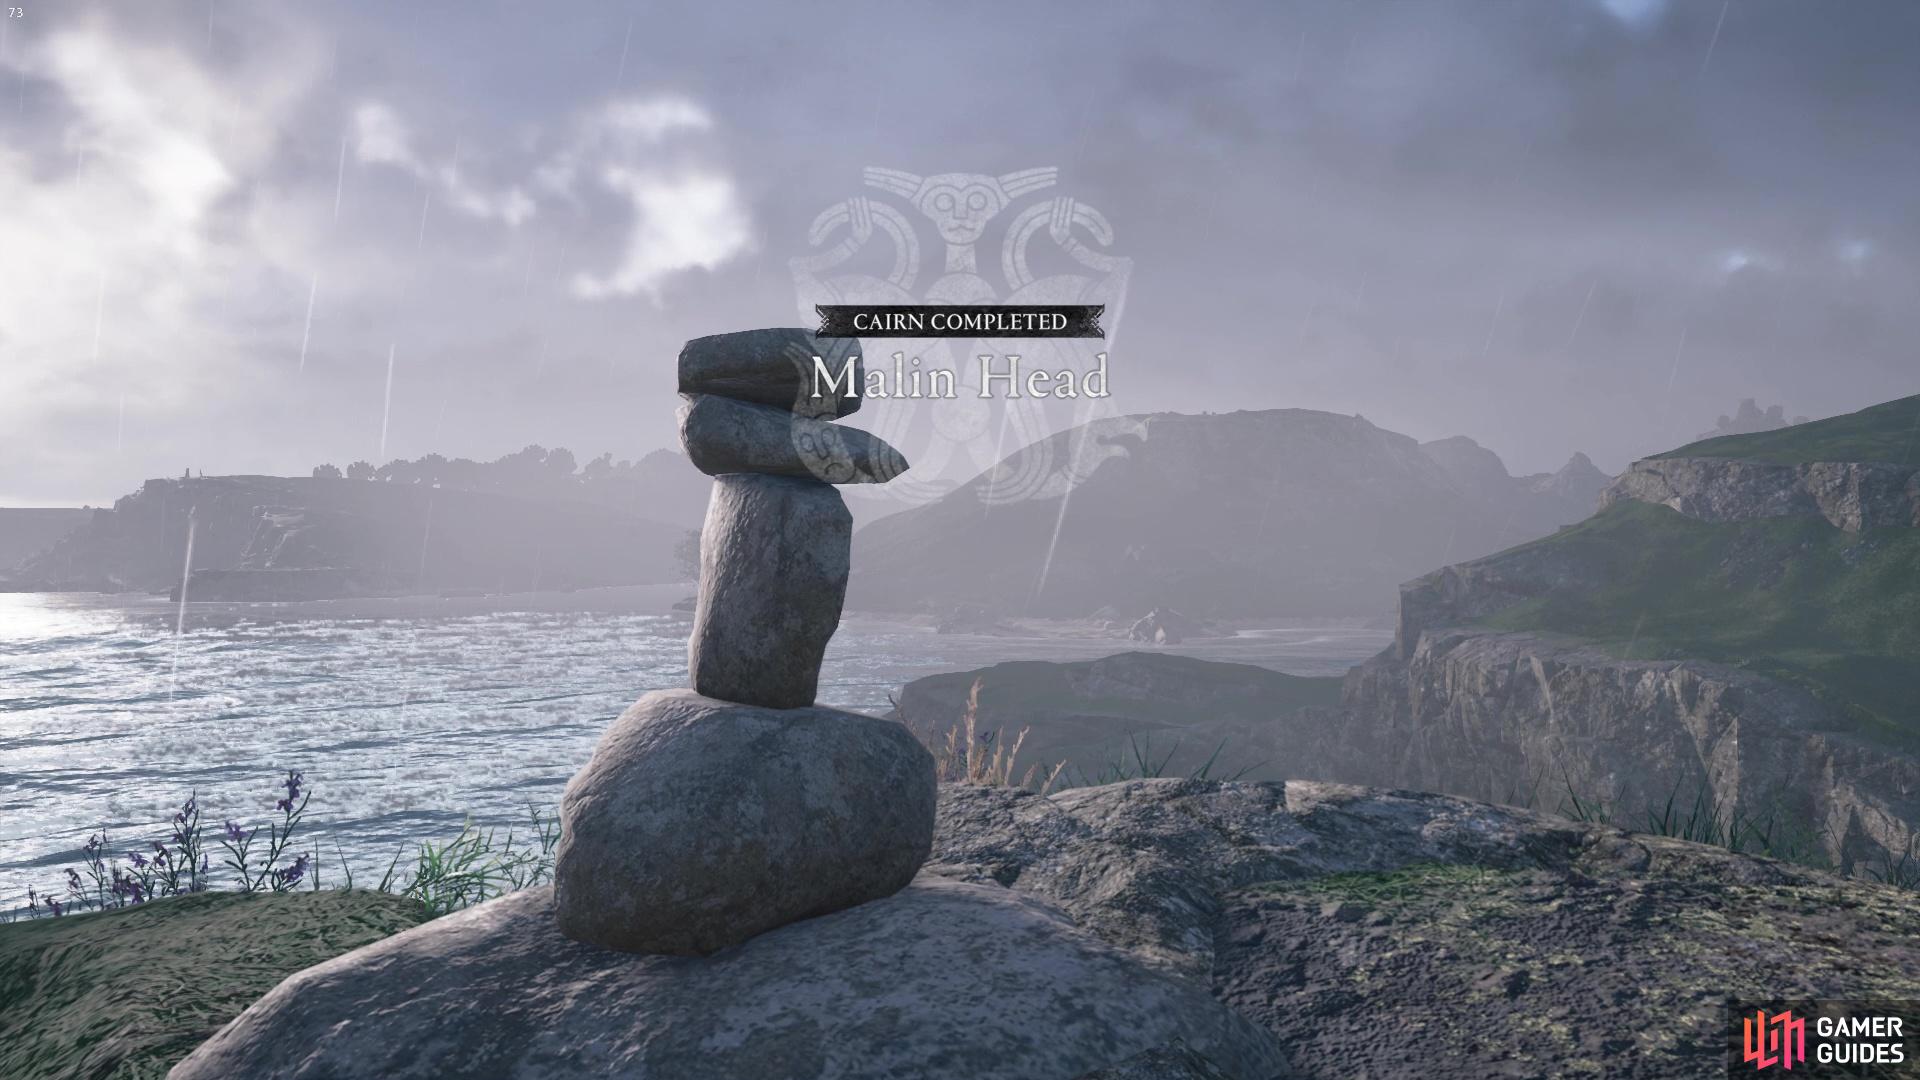 this might be a tricky stack so make sure to gently place stones and rotate the camera for better angles.